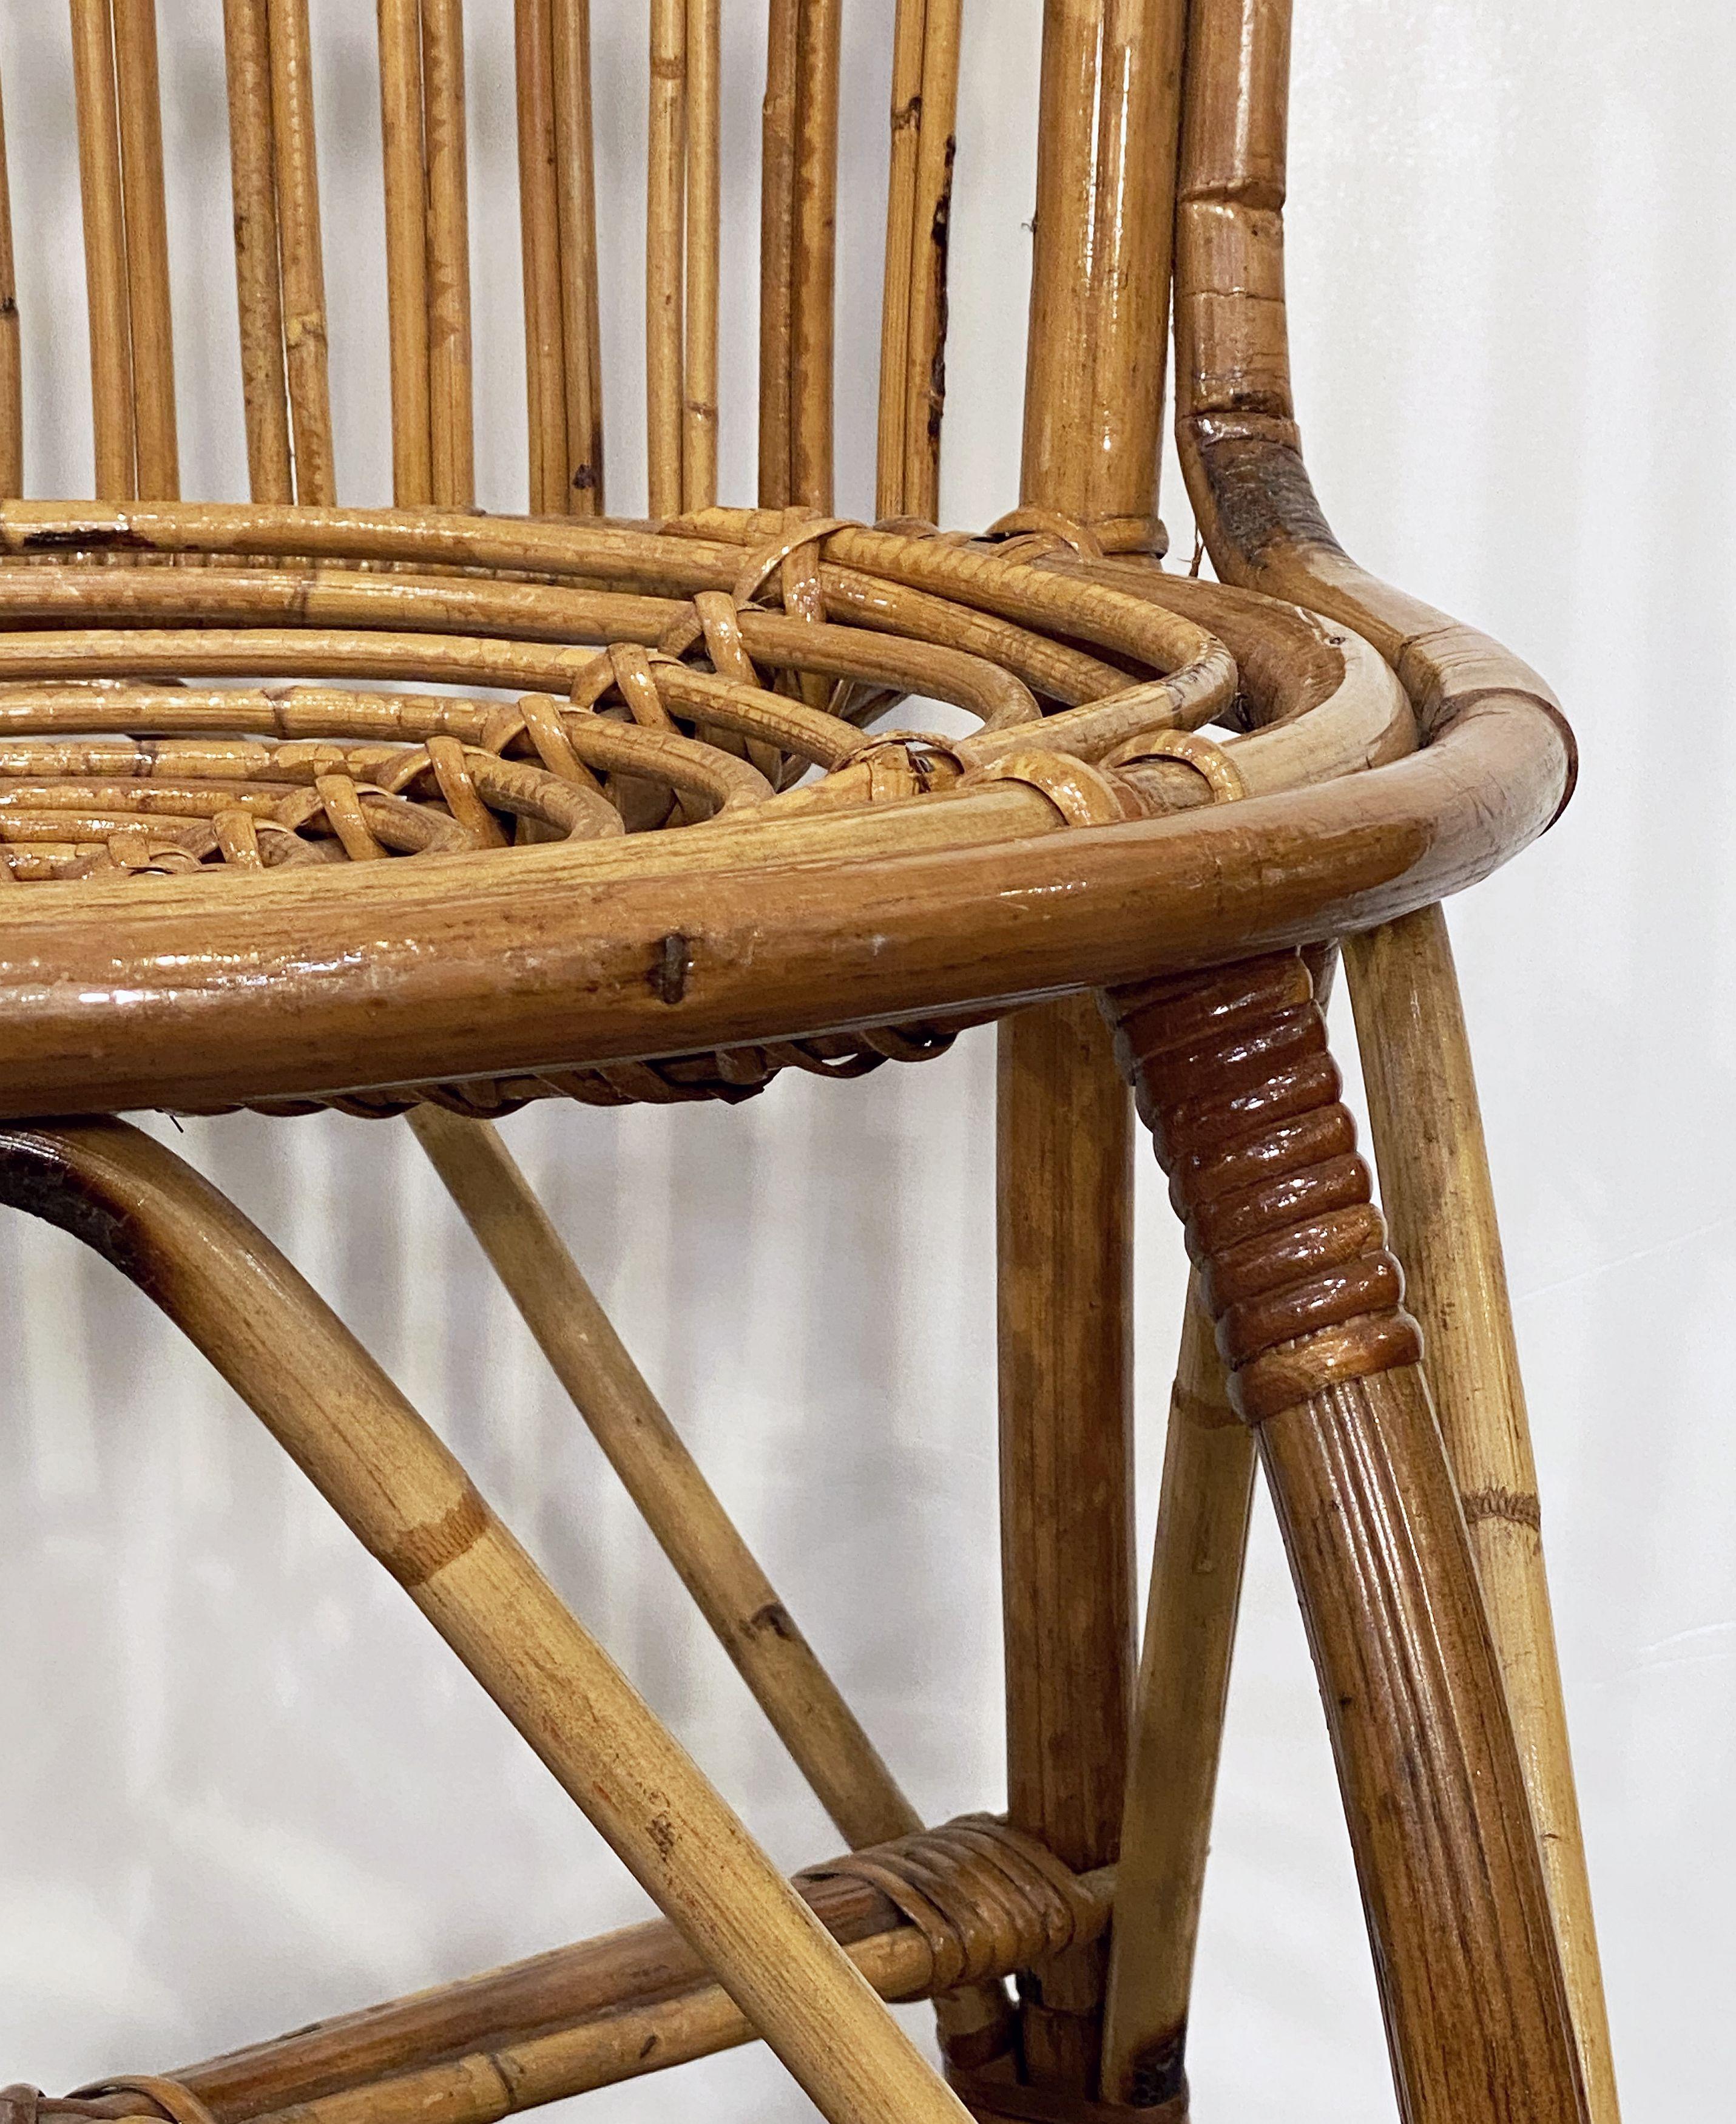 Italian Fan-Backed Chair of Rattan and Bamboo from the Mid-20th Century For Sale 11